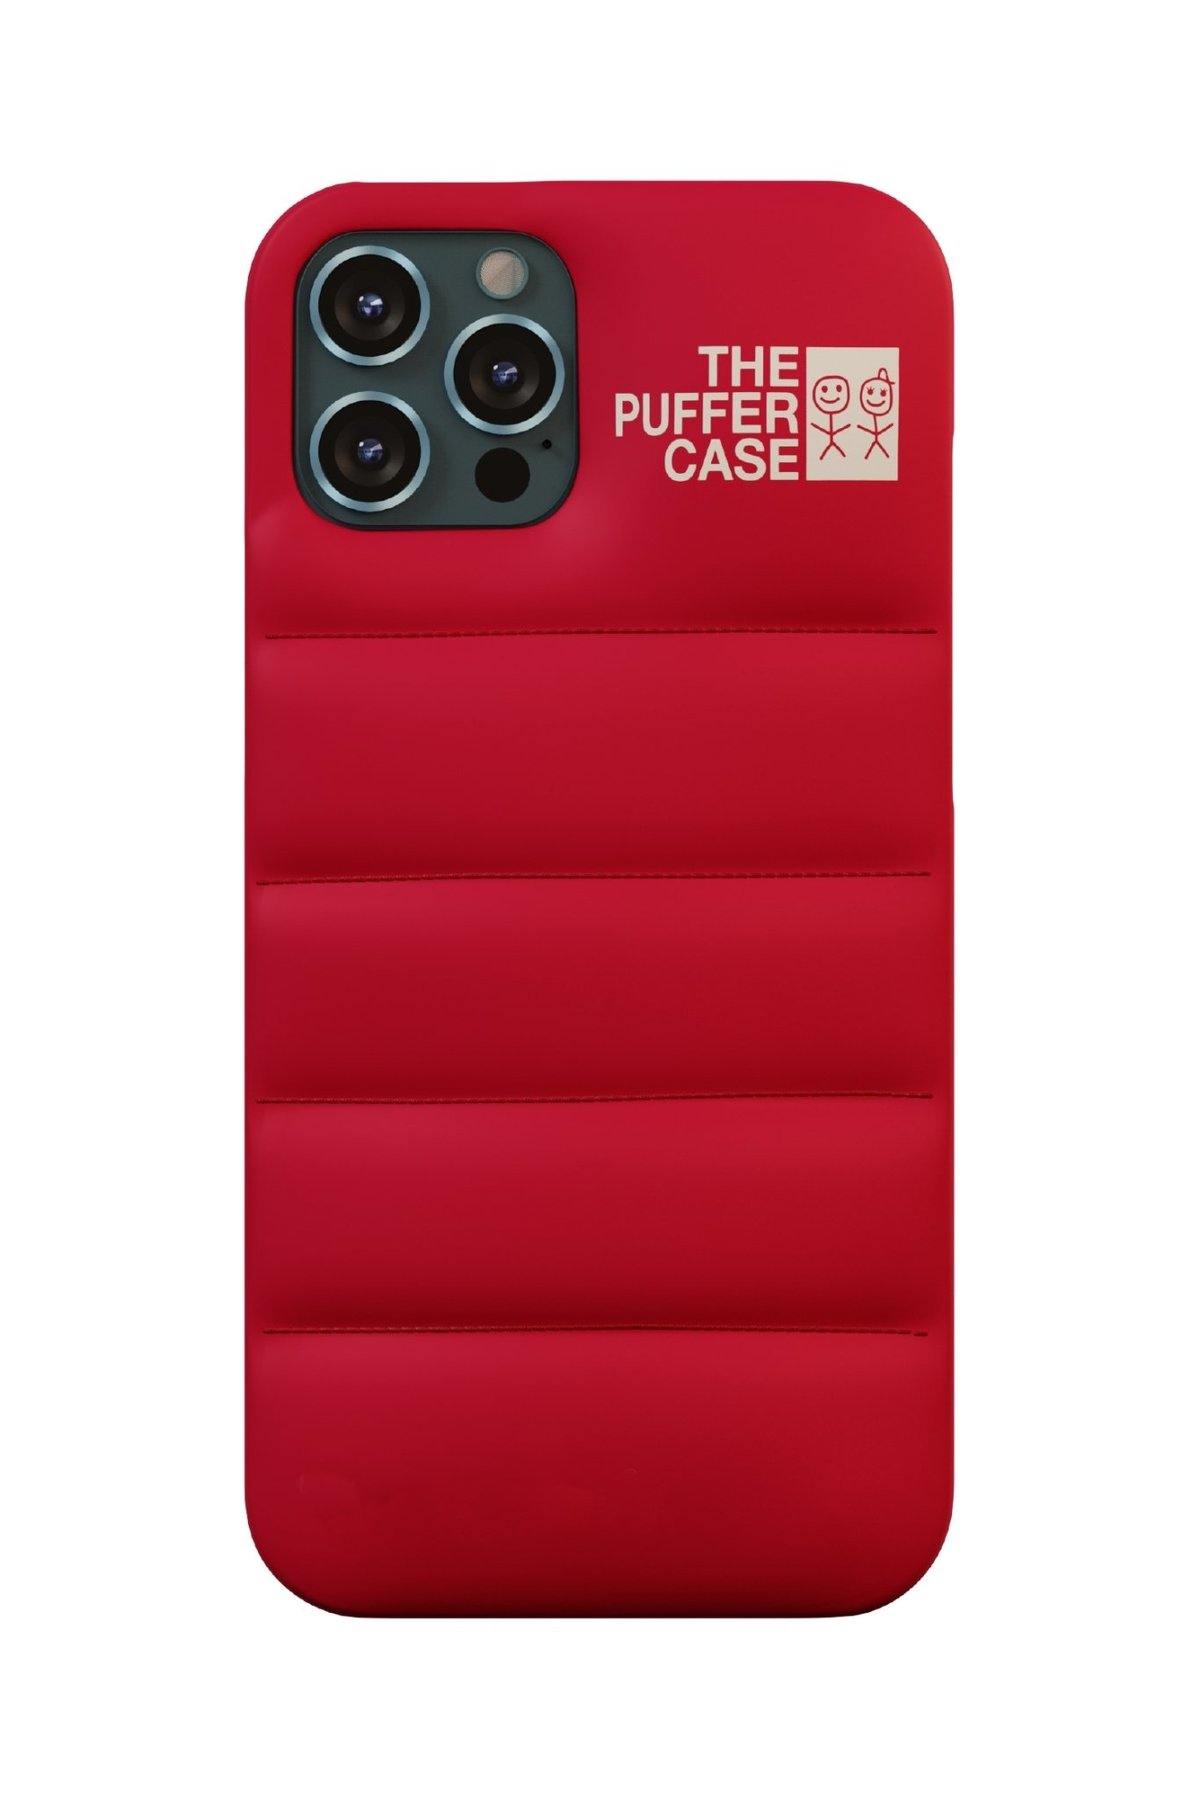 The Puffer Case